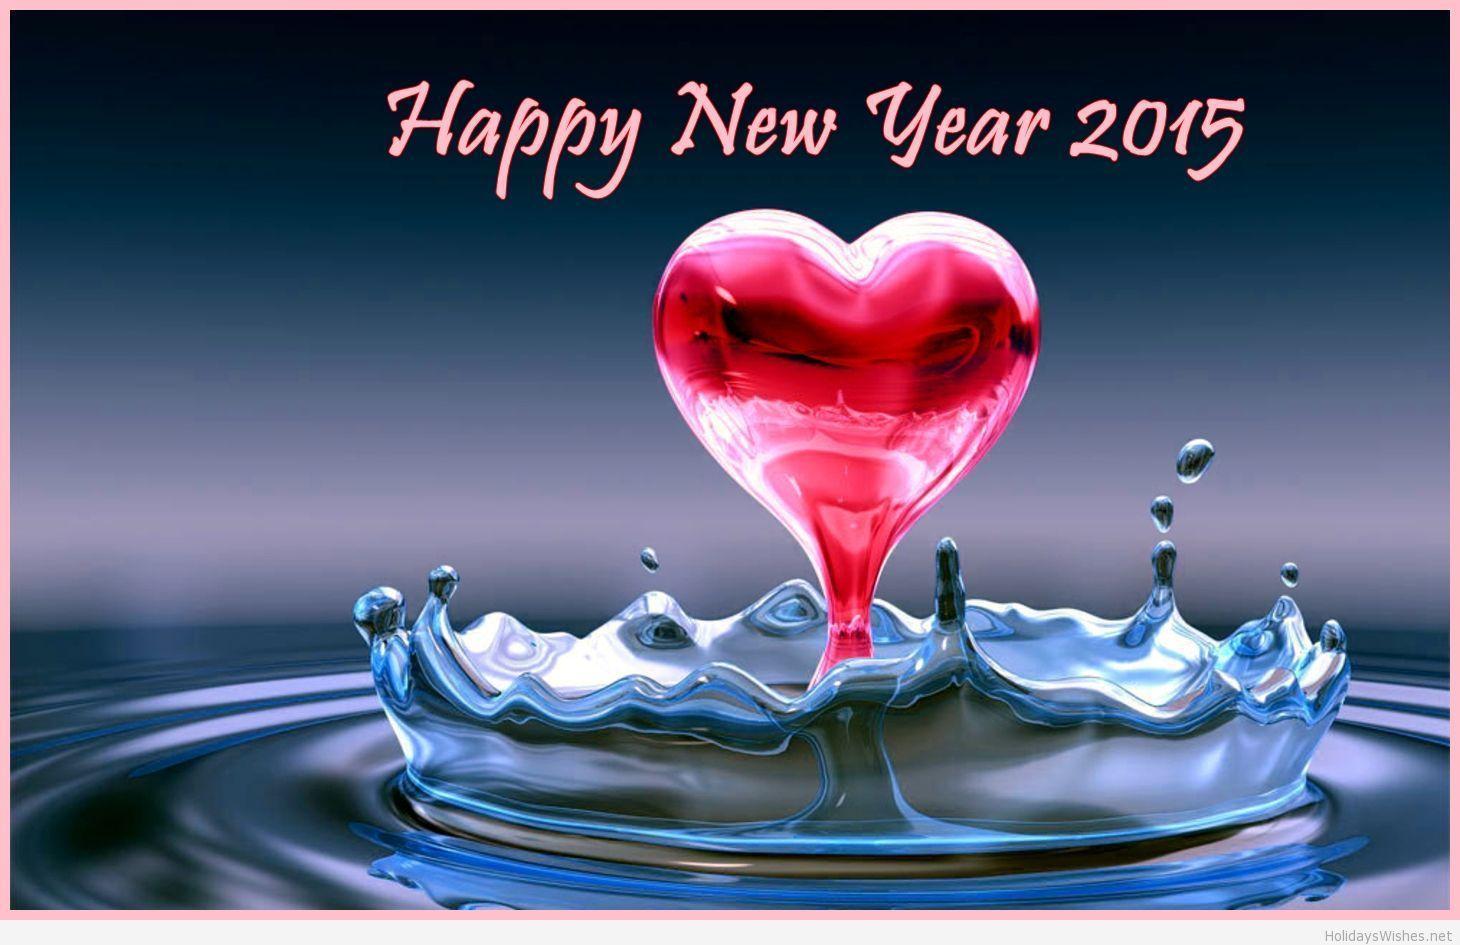 Awesome 3D love wallpaper new year 2015